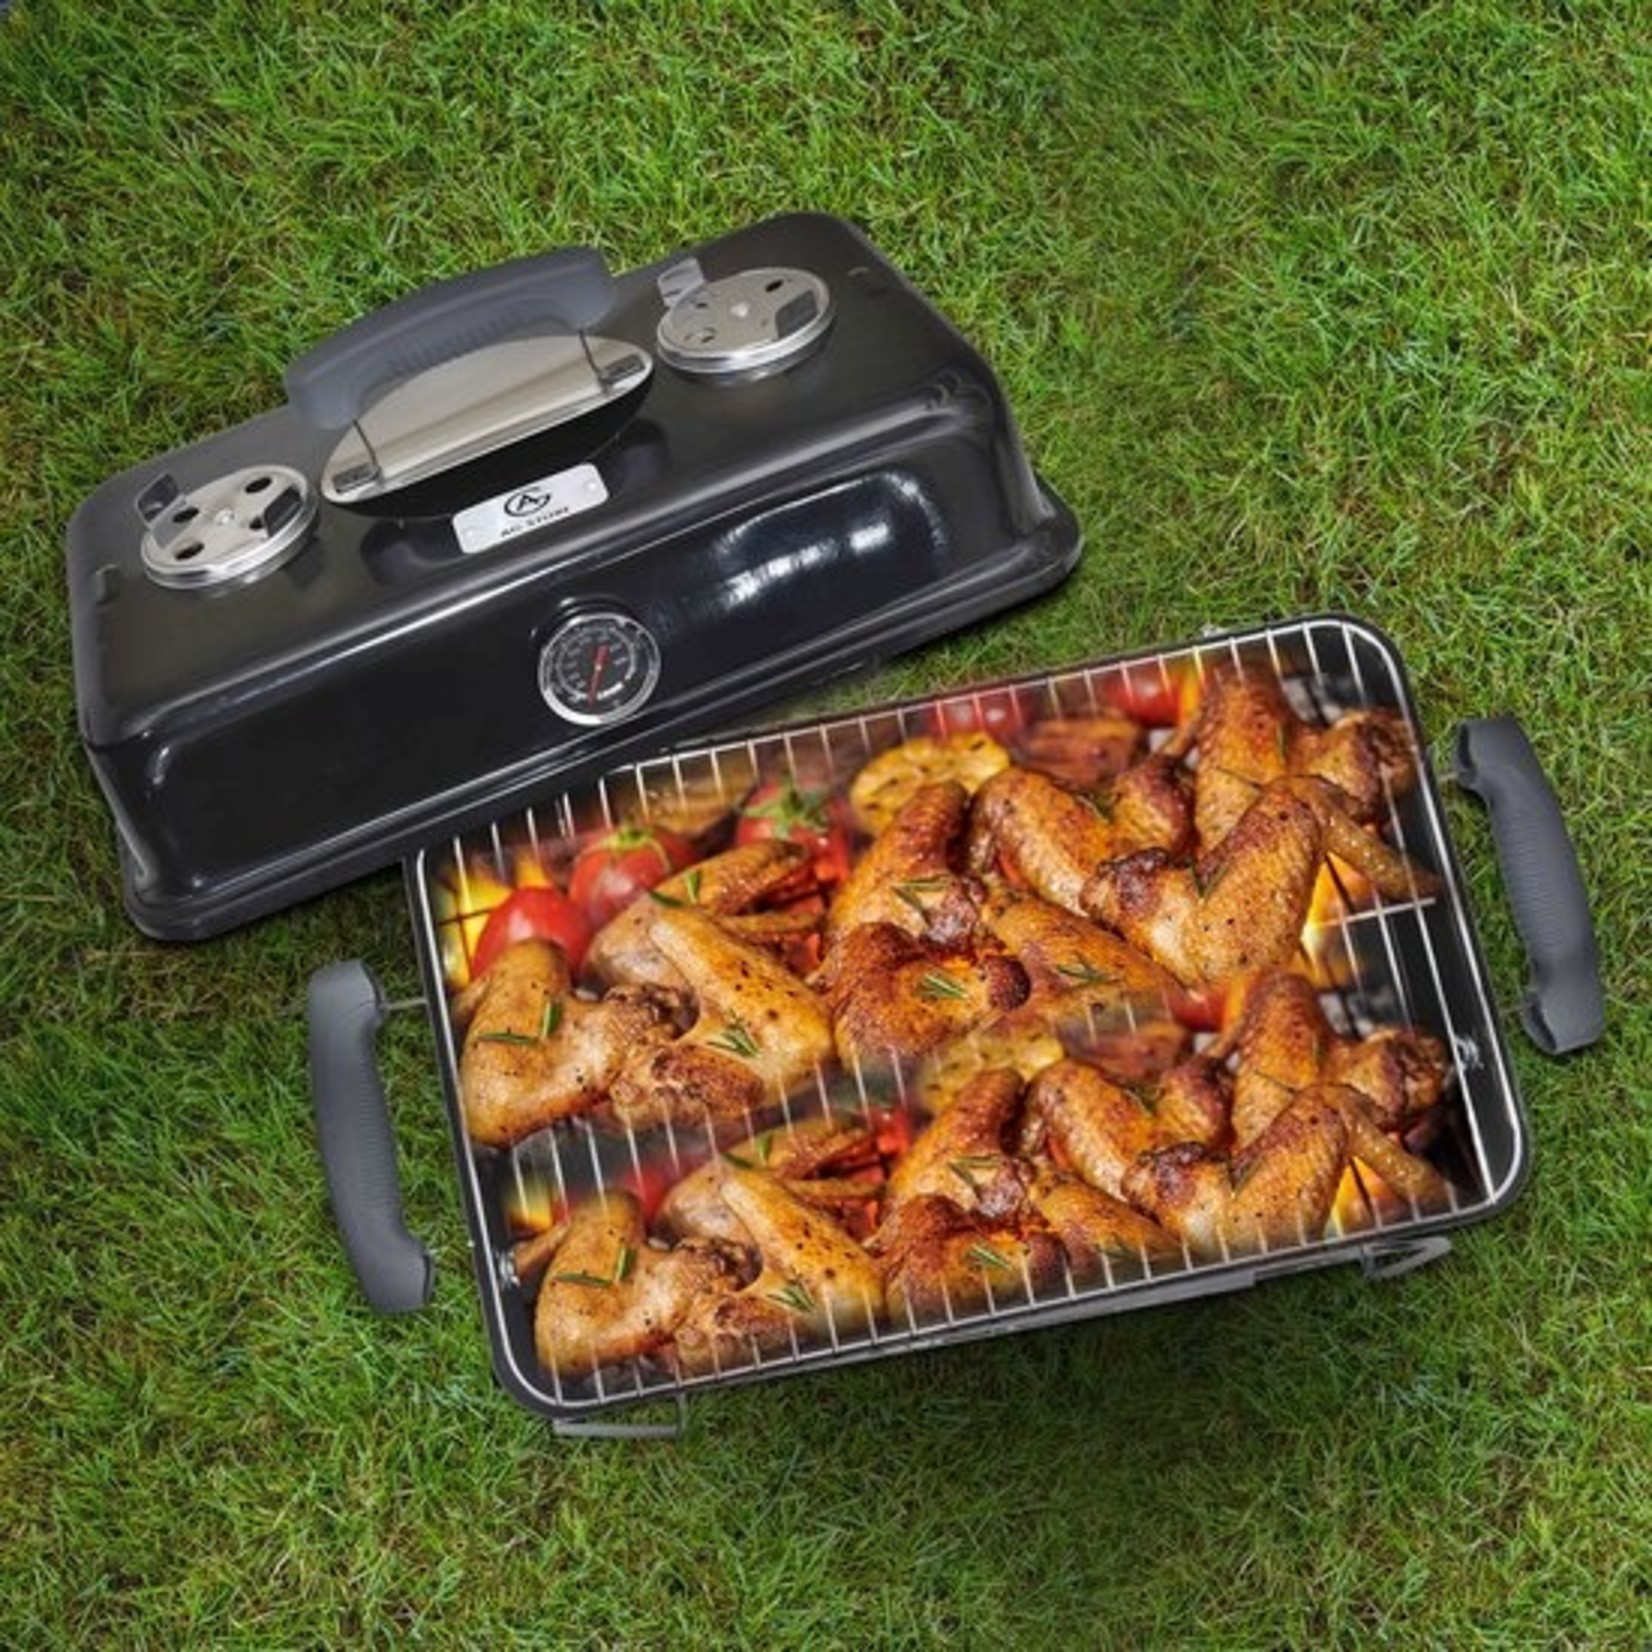 AG AG To-Go barbecue Ø44 cm - Houtskoolbarbecues - incl. Thermometer - temperatuur roestvrij - Compact -Vierkante Barbecue - Incl. deksel- traditionele bbq - 6 personen -Anywhere Ventilatierooster voor zuurstofregulering - Zwart